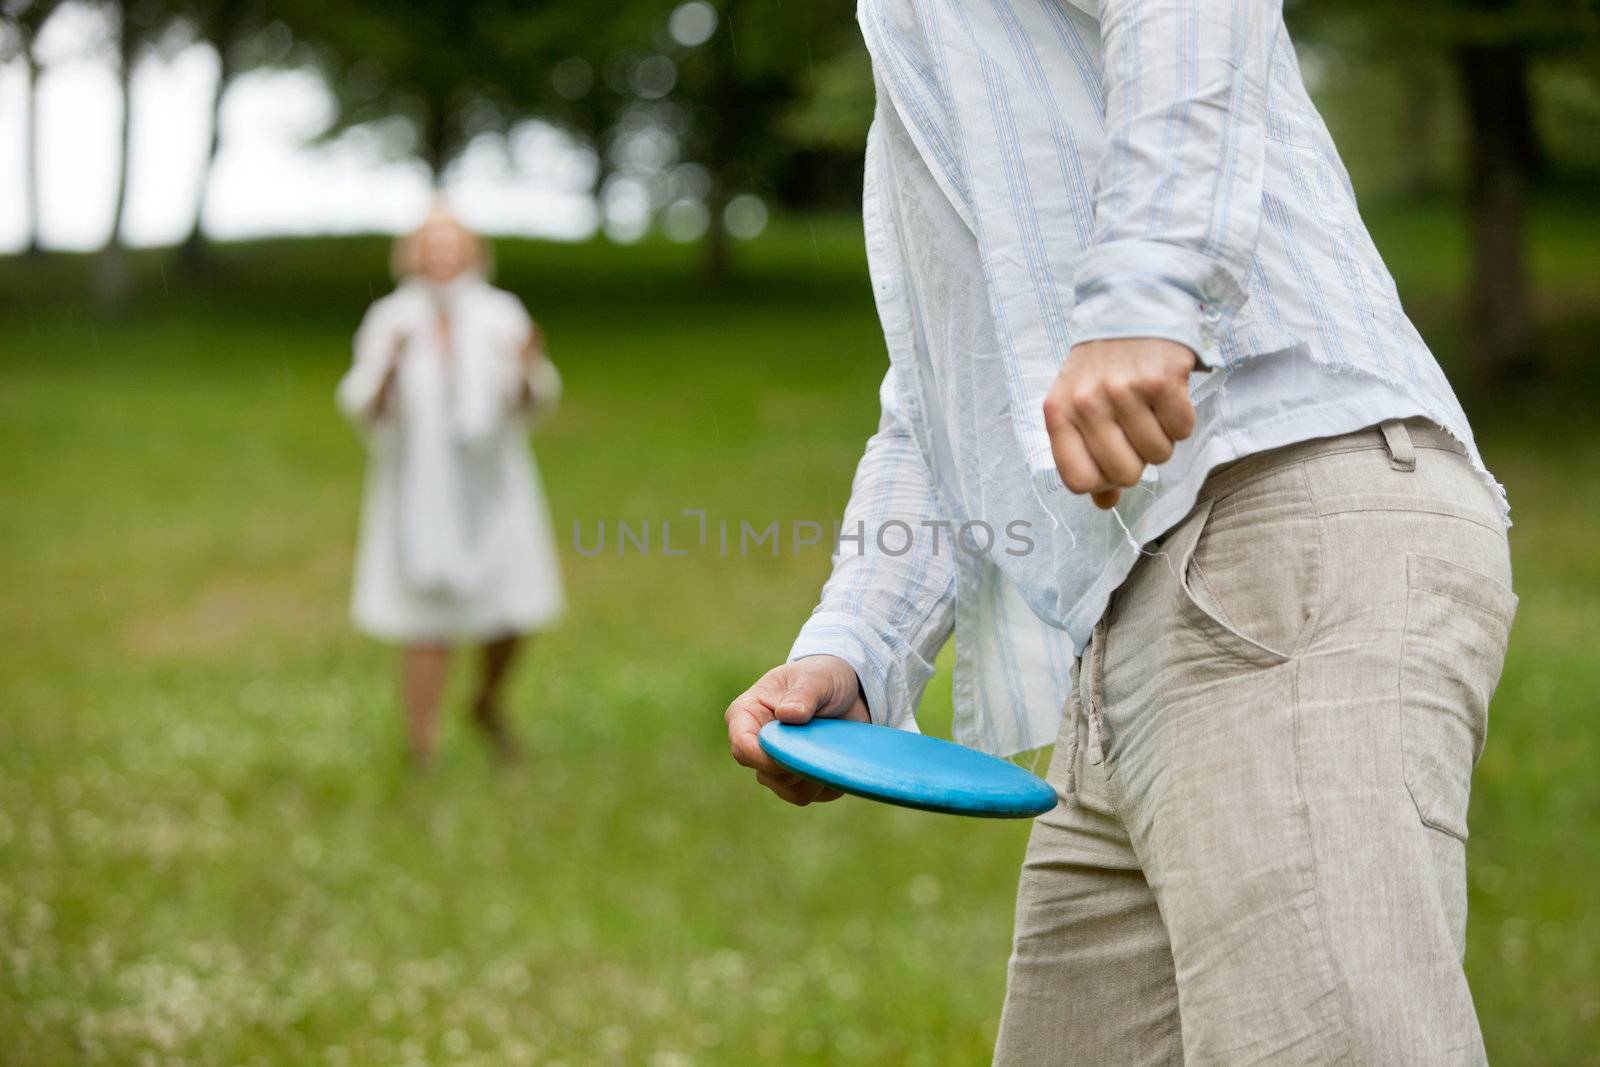 Midsection of man in casual wear ready to throw flying disc with woman in background